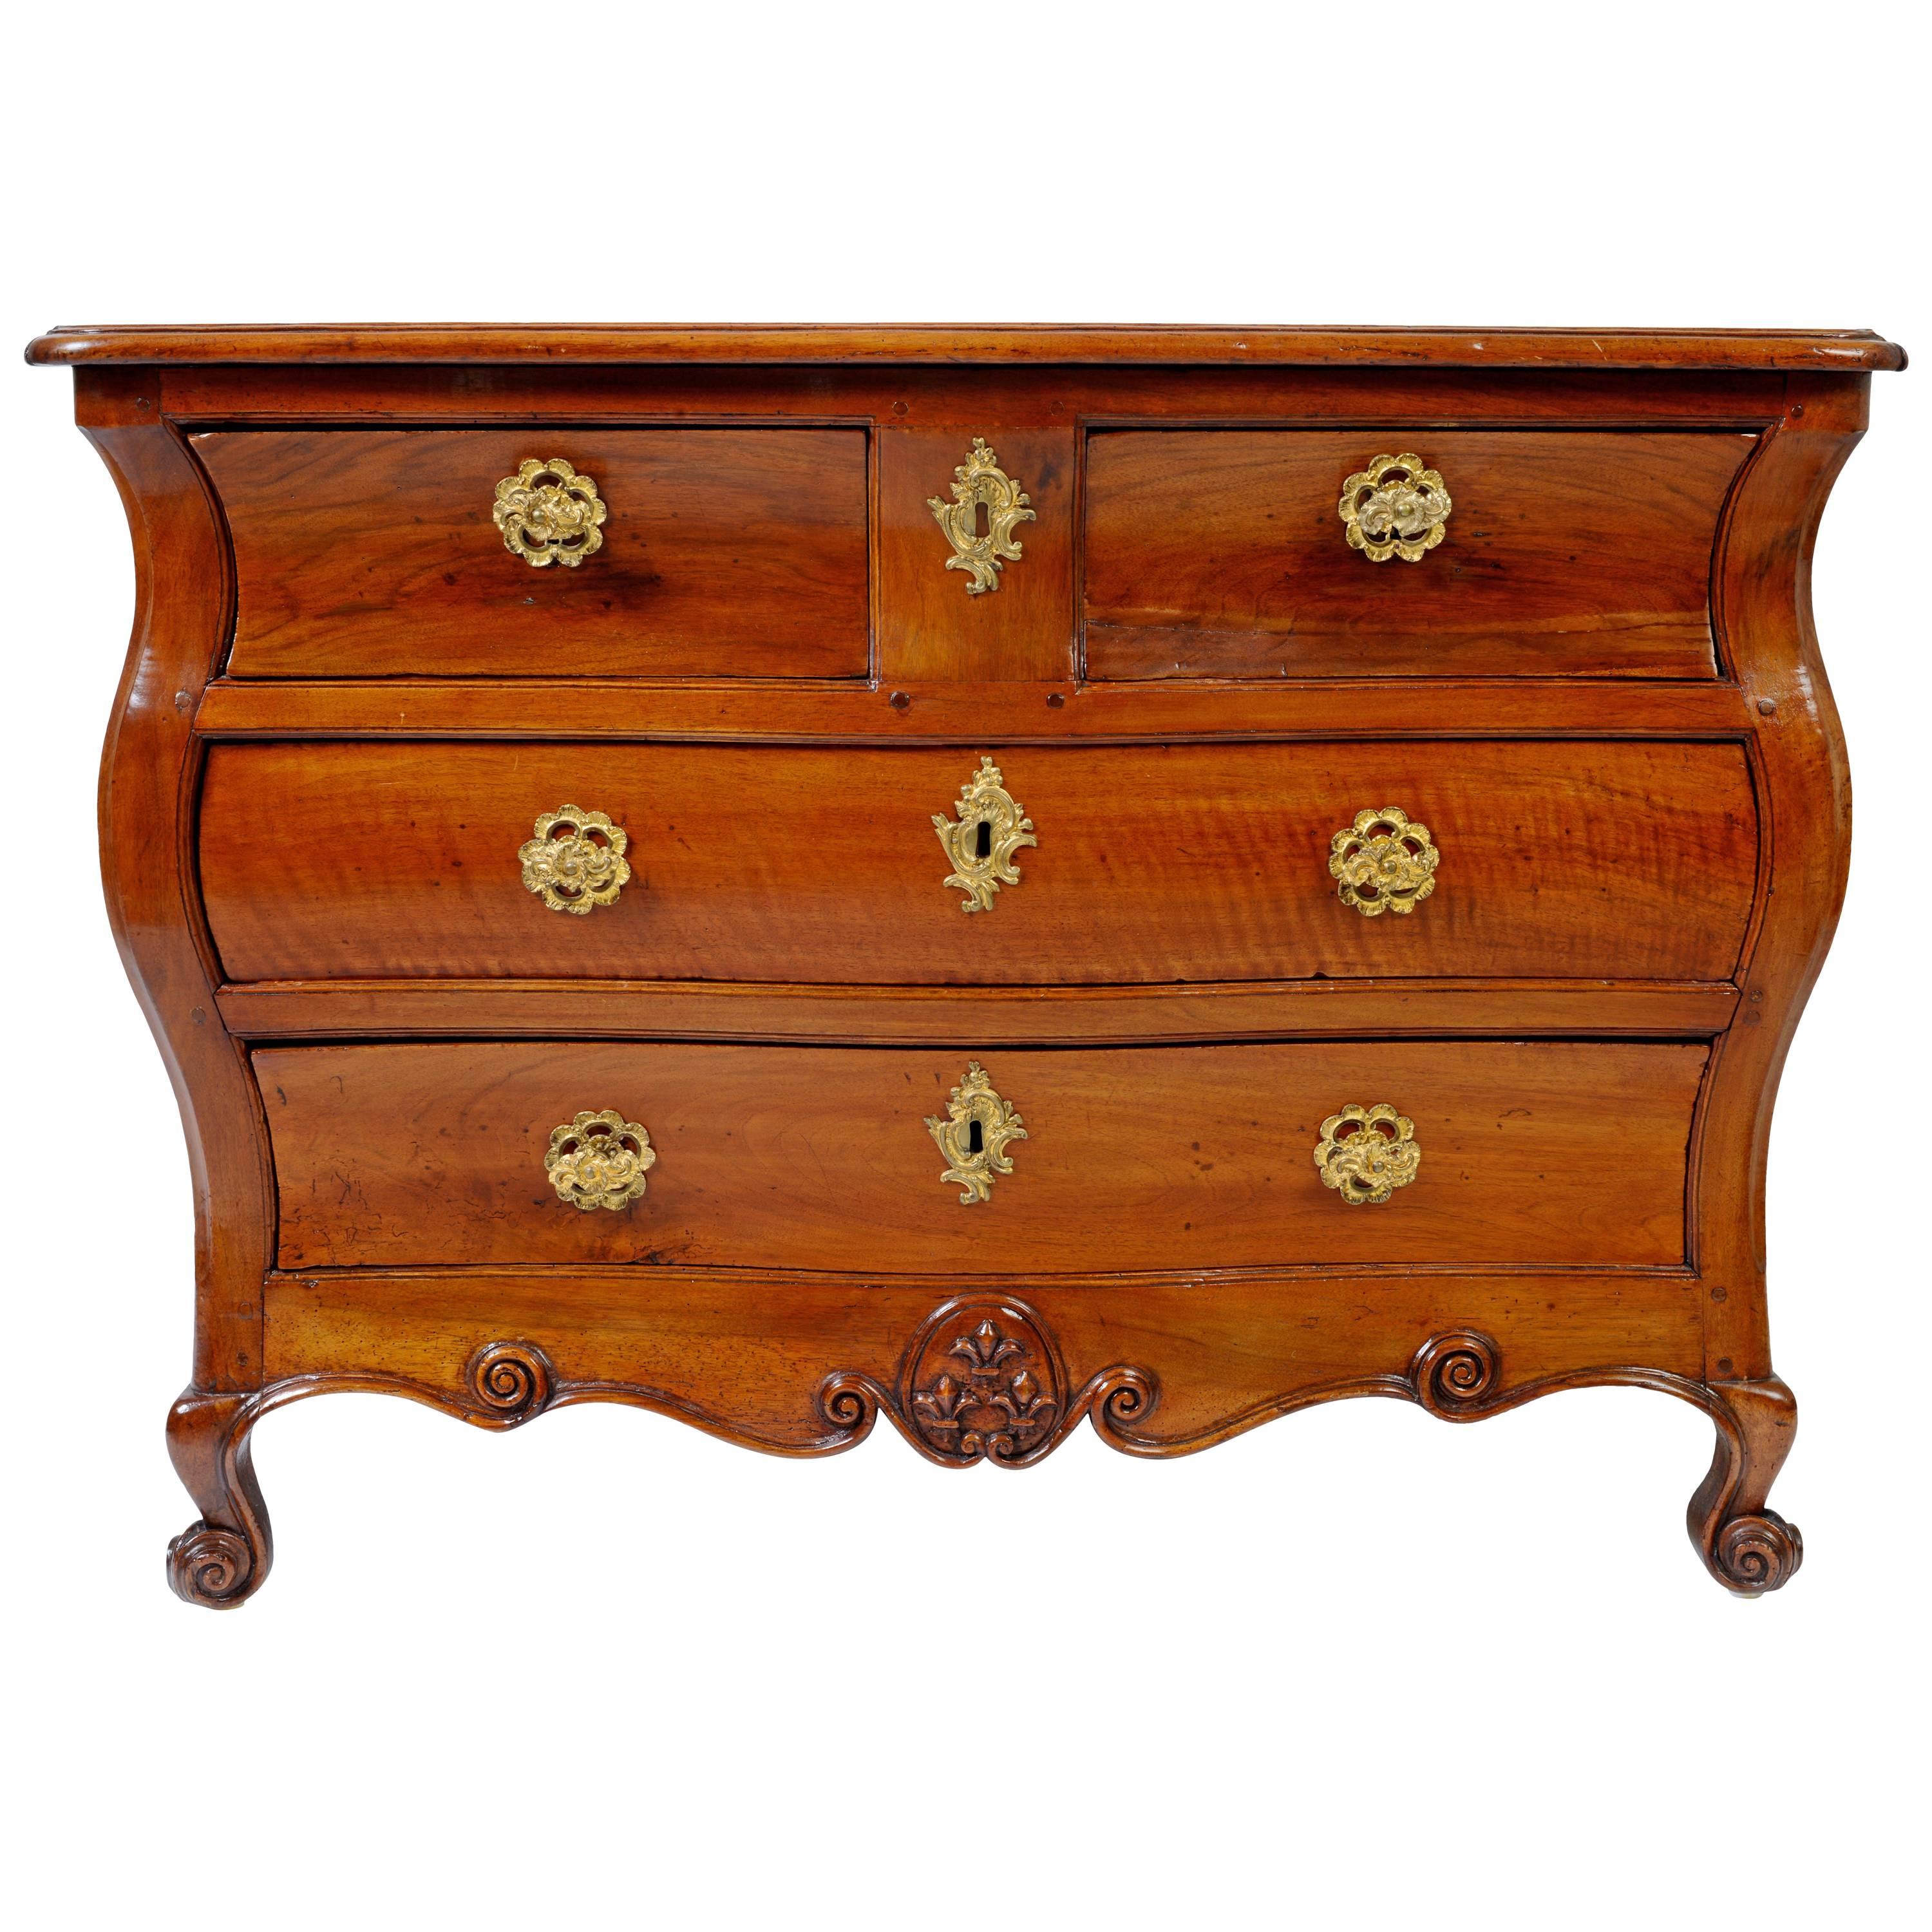 Regence Period Walnut Bombé Commode, Early 18th Century For Sale